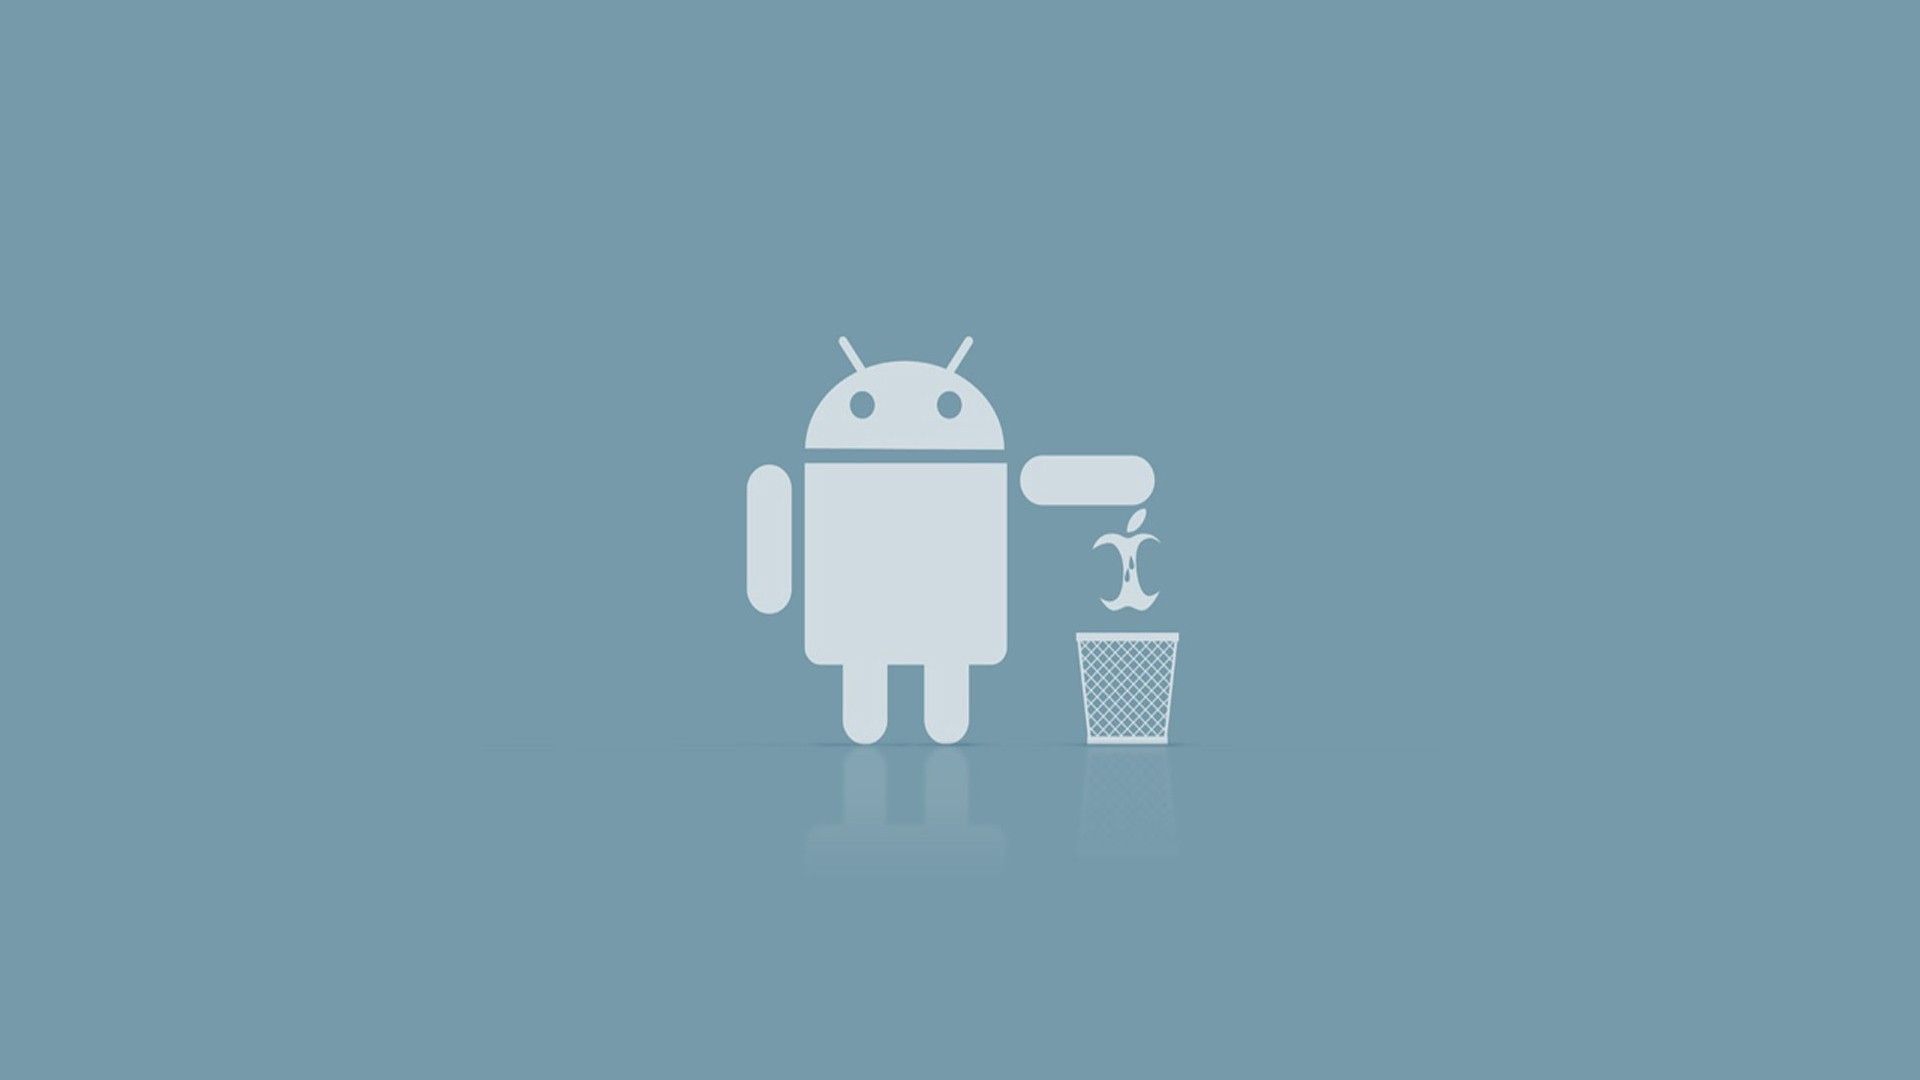 operating system, Android, minimalism wallpaper